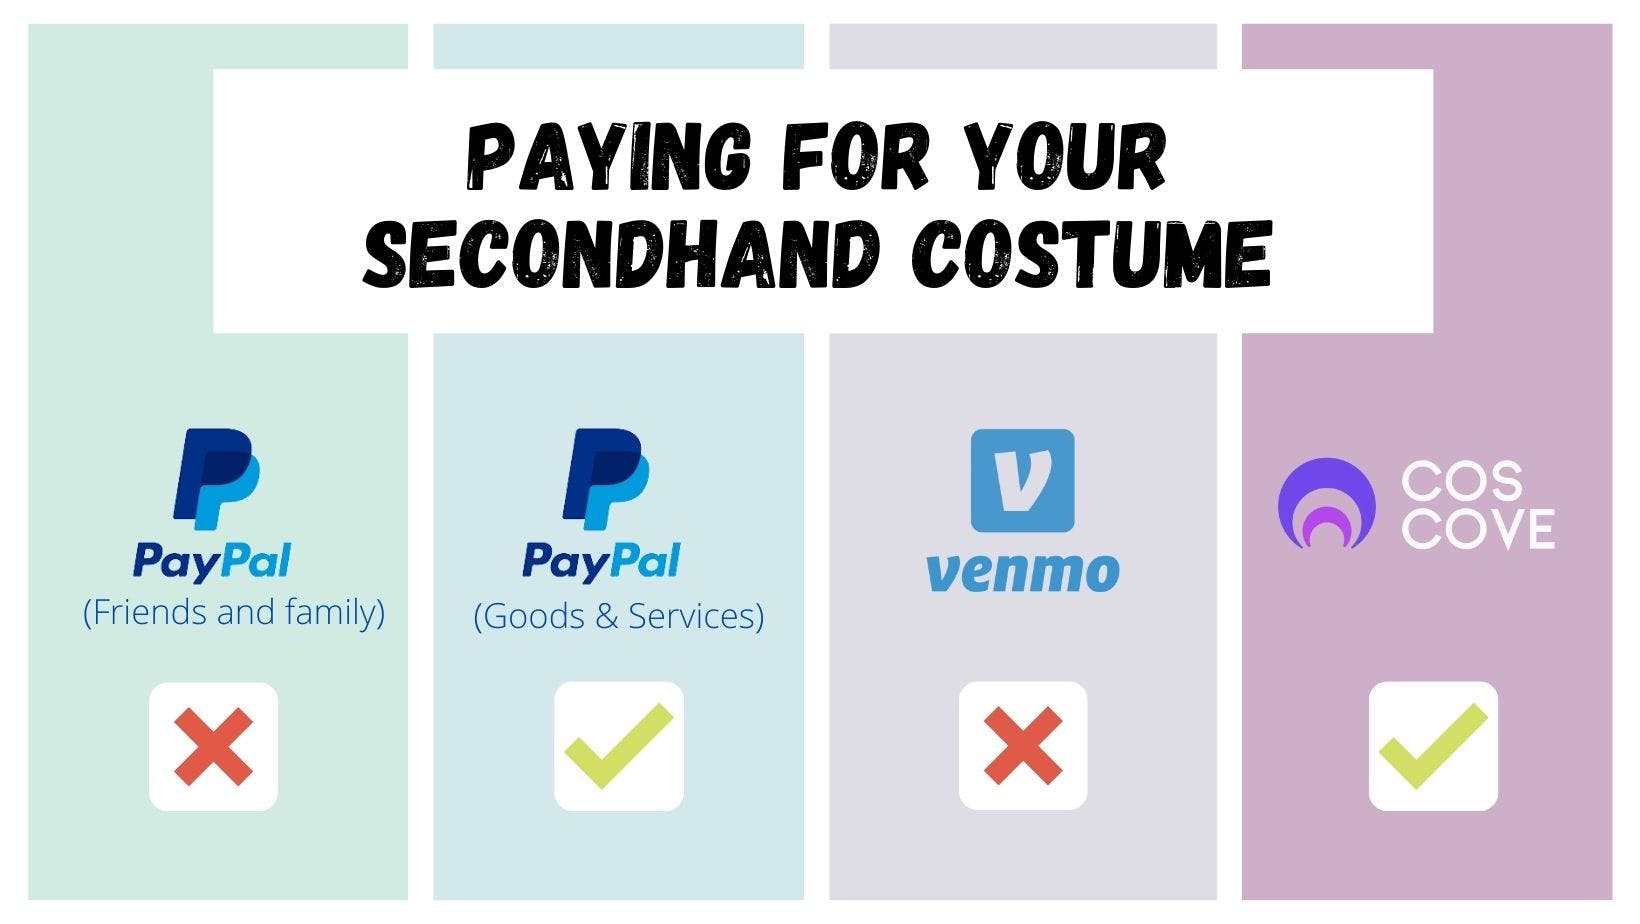 Always use protected payment methods when buying secondhand, especially for costumes.